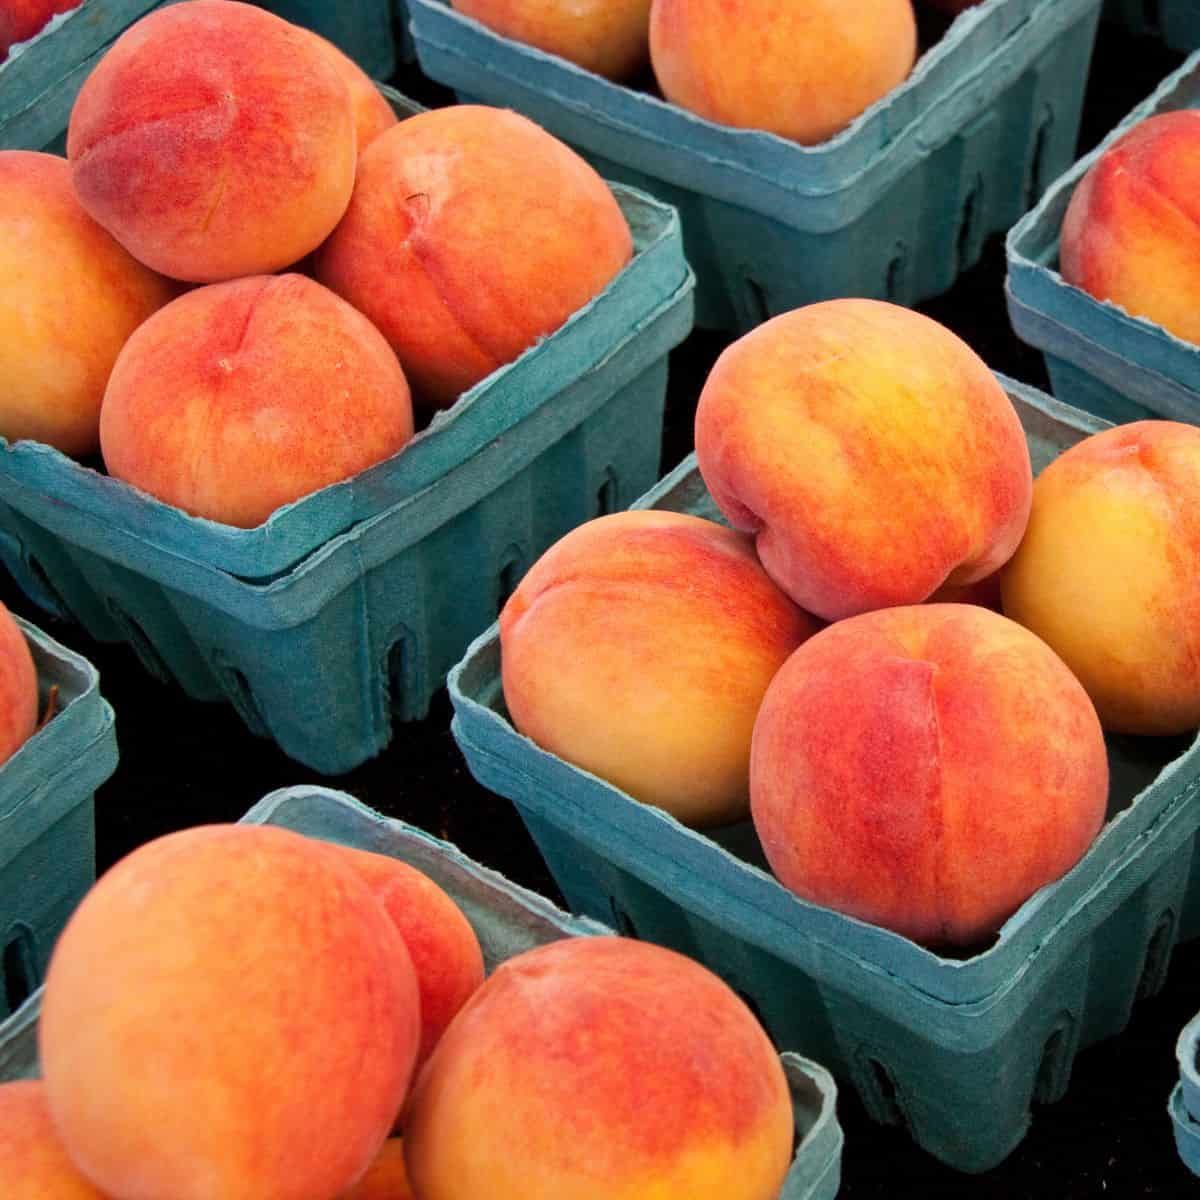 How To Store Peaches To Avoid Fruit Flies